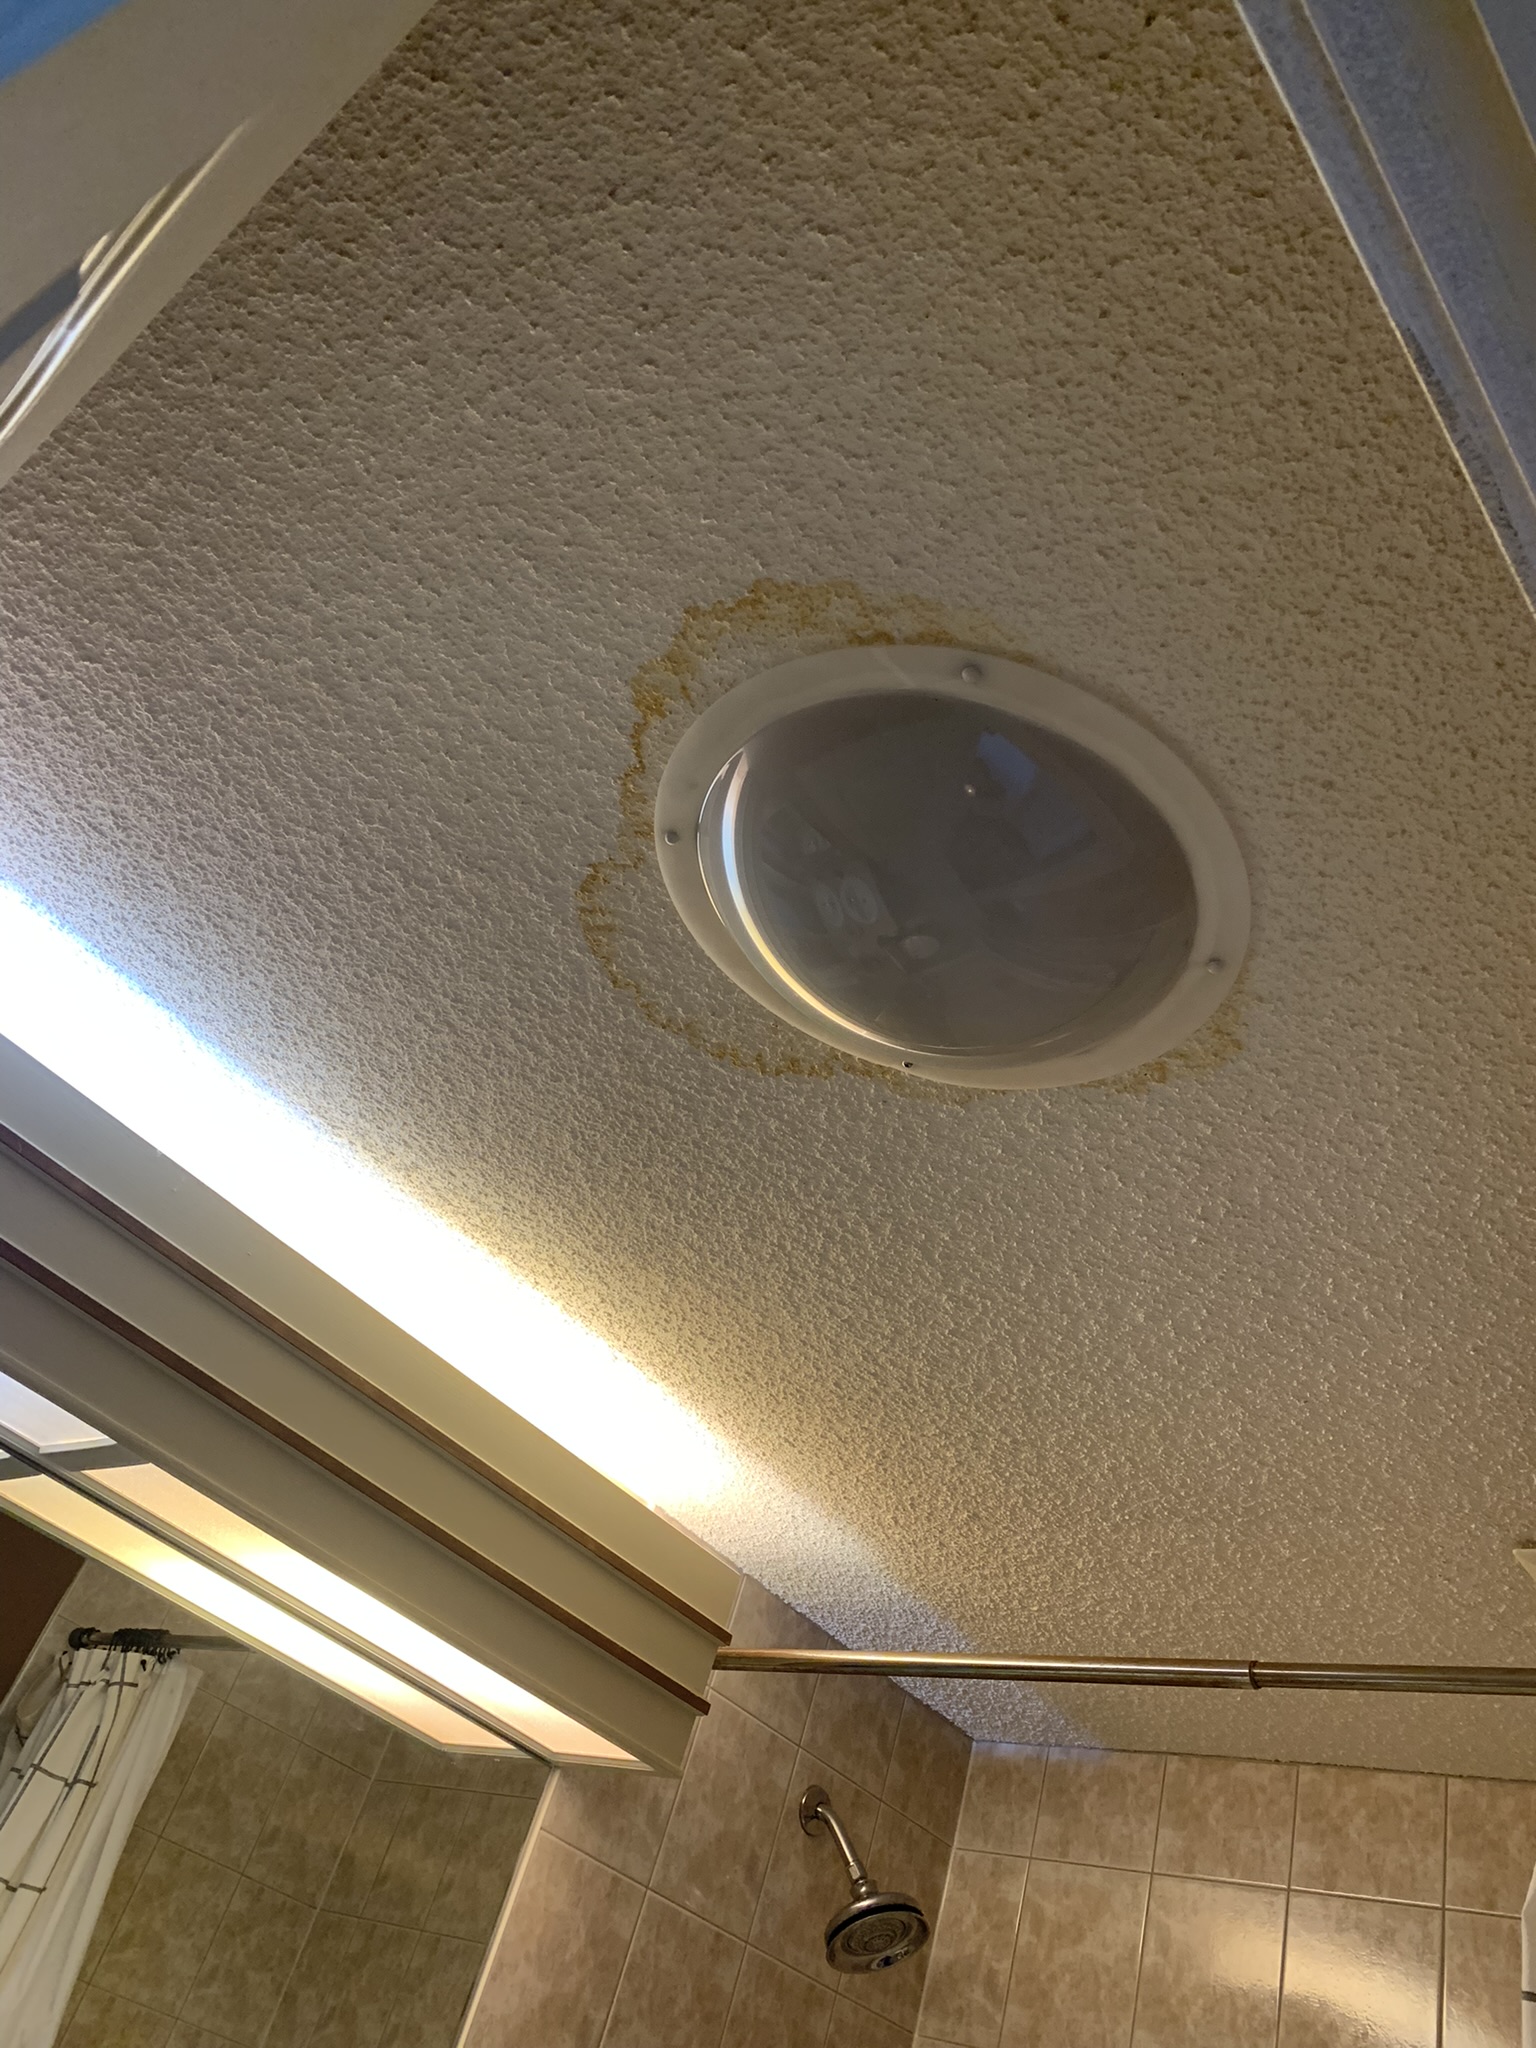 Popcorn ceiling stained with water damage around a sun tunnel skylight